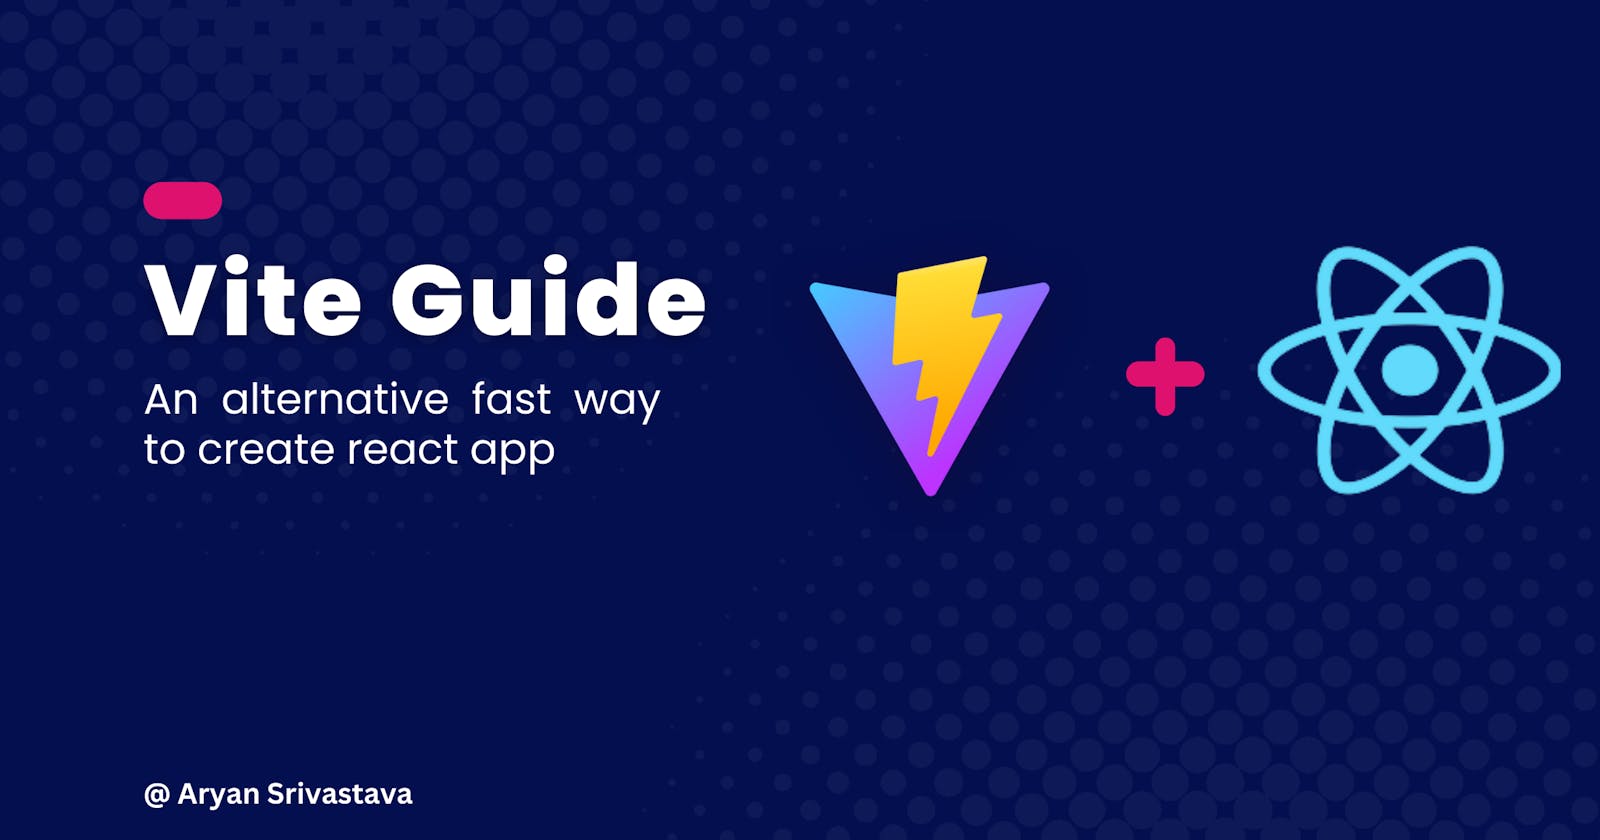 Vite guide: An alternative fast way to create react app